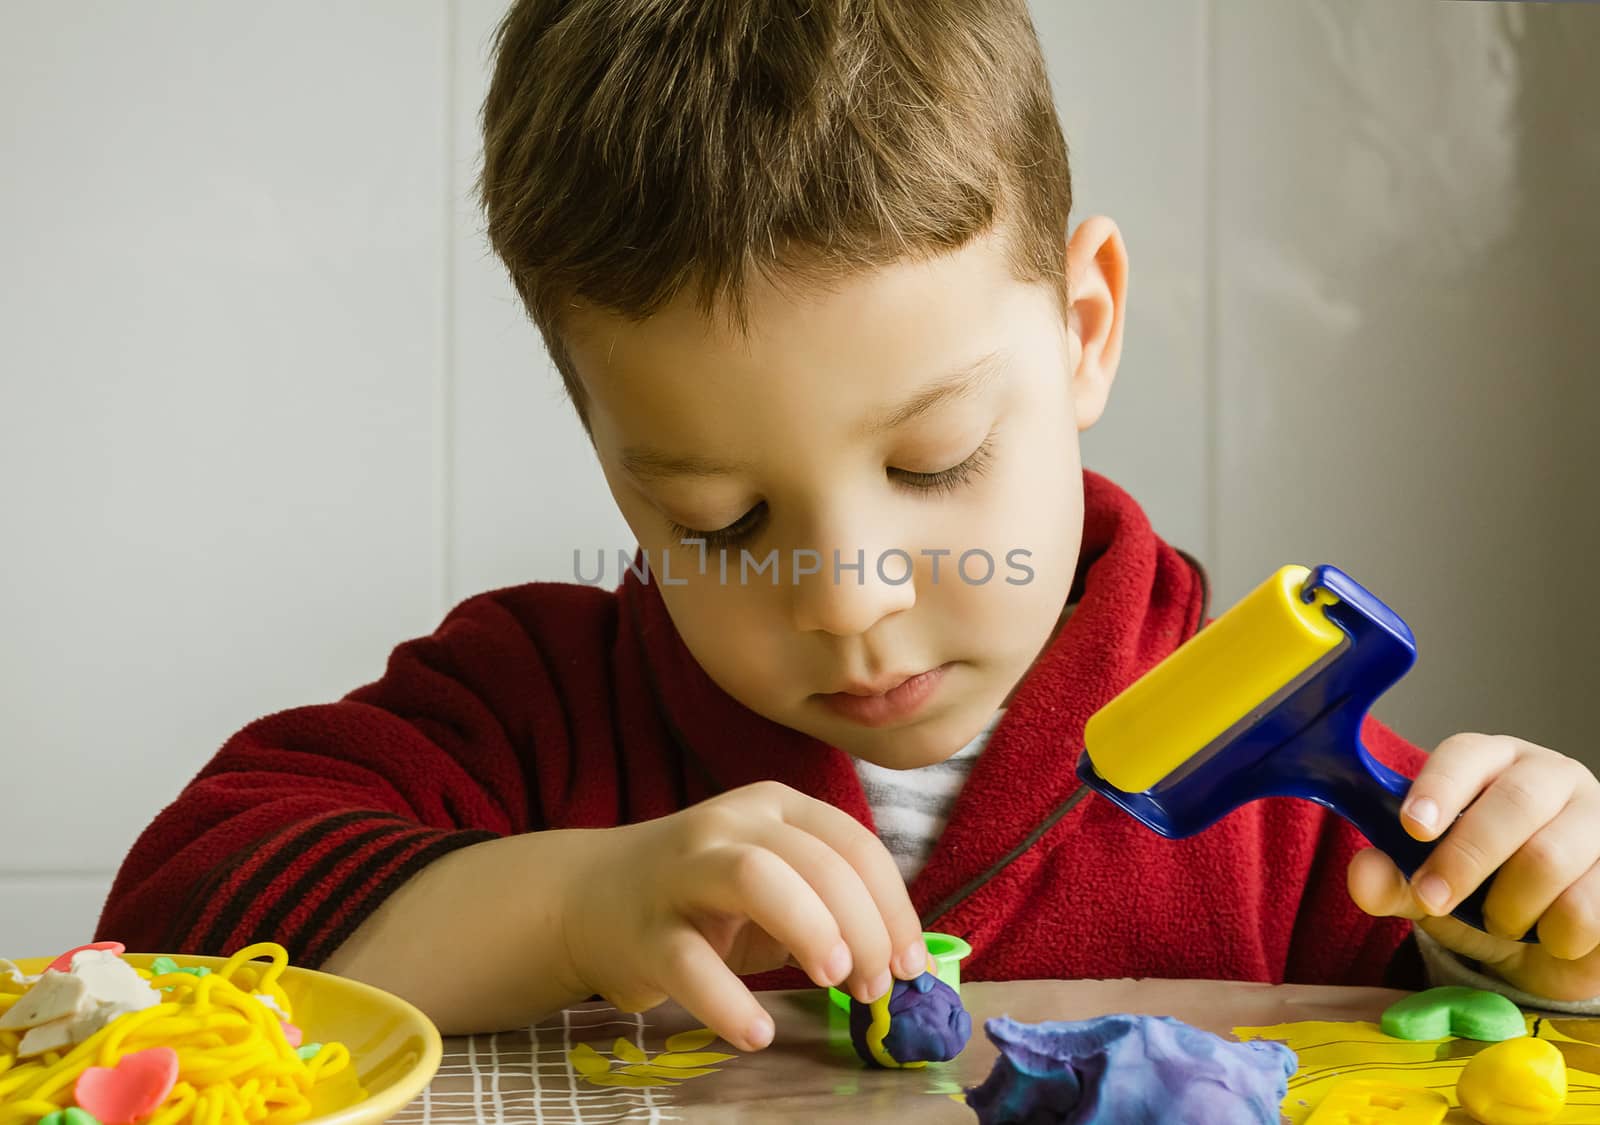 Cute child playing with plasticine by doble.d